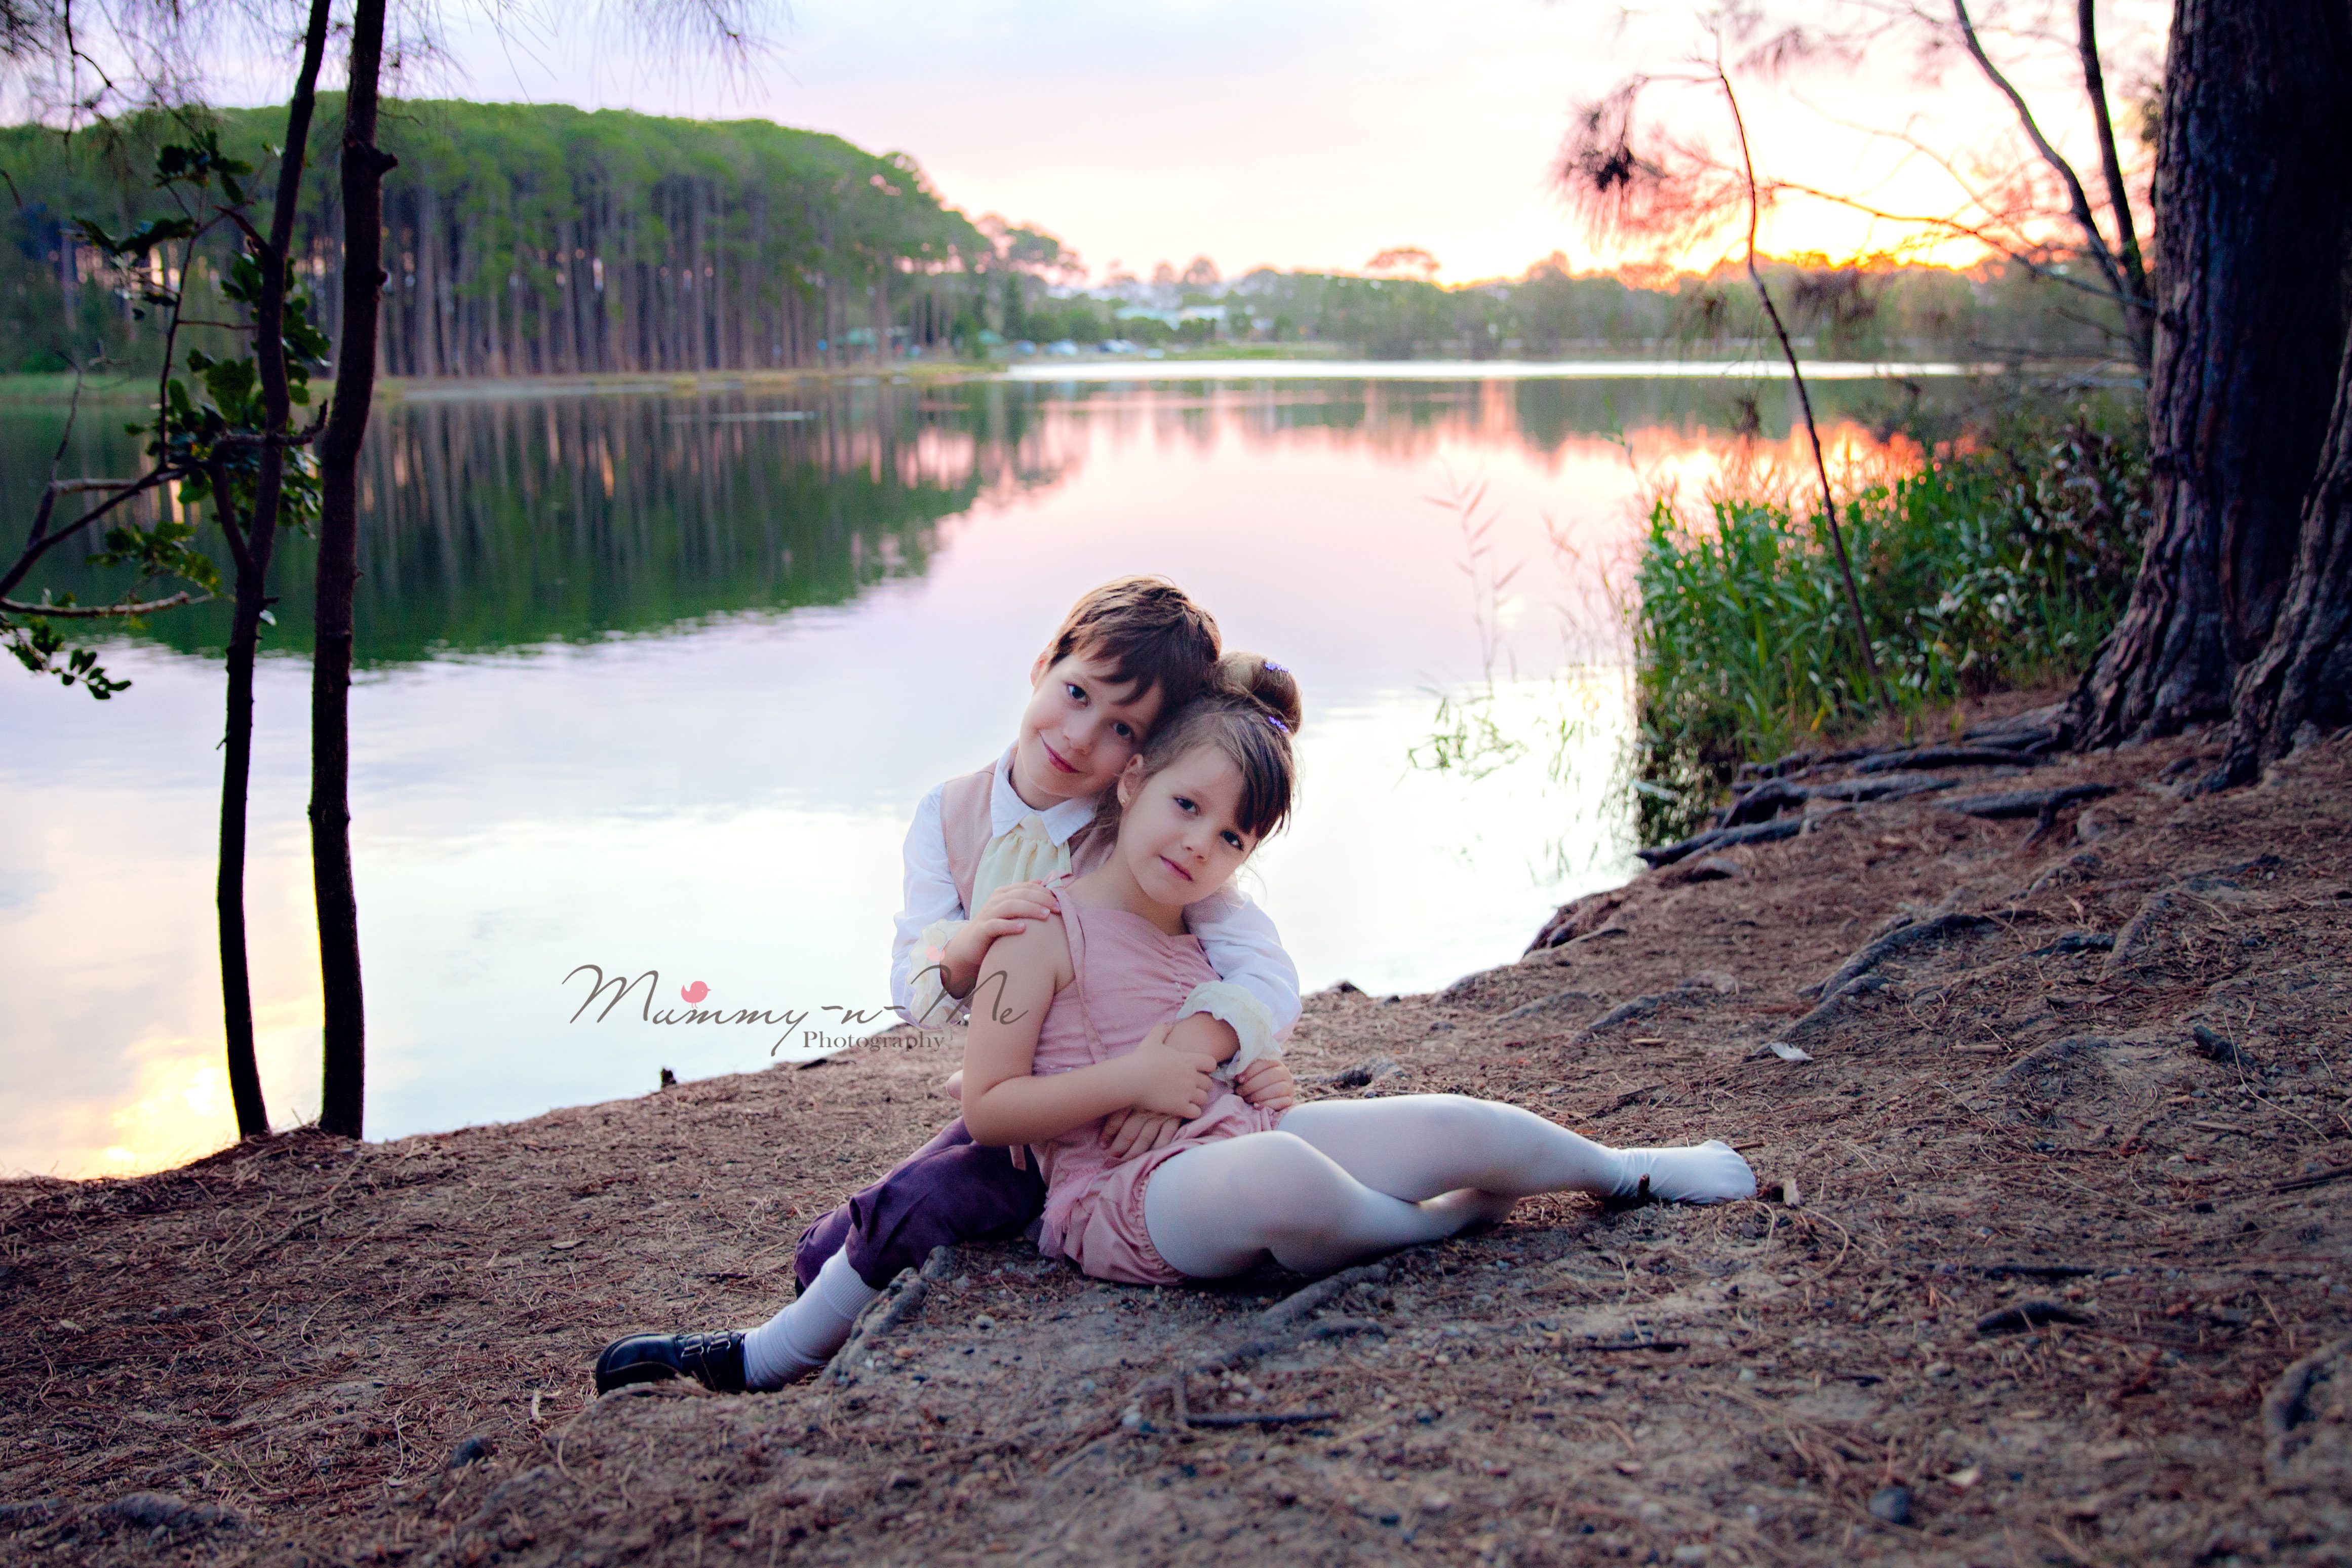 stylised family in forest themed session brisbane stylised family photographer